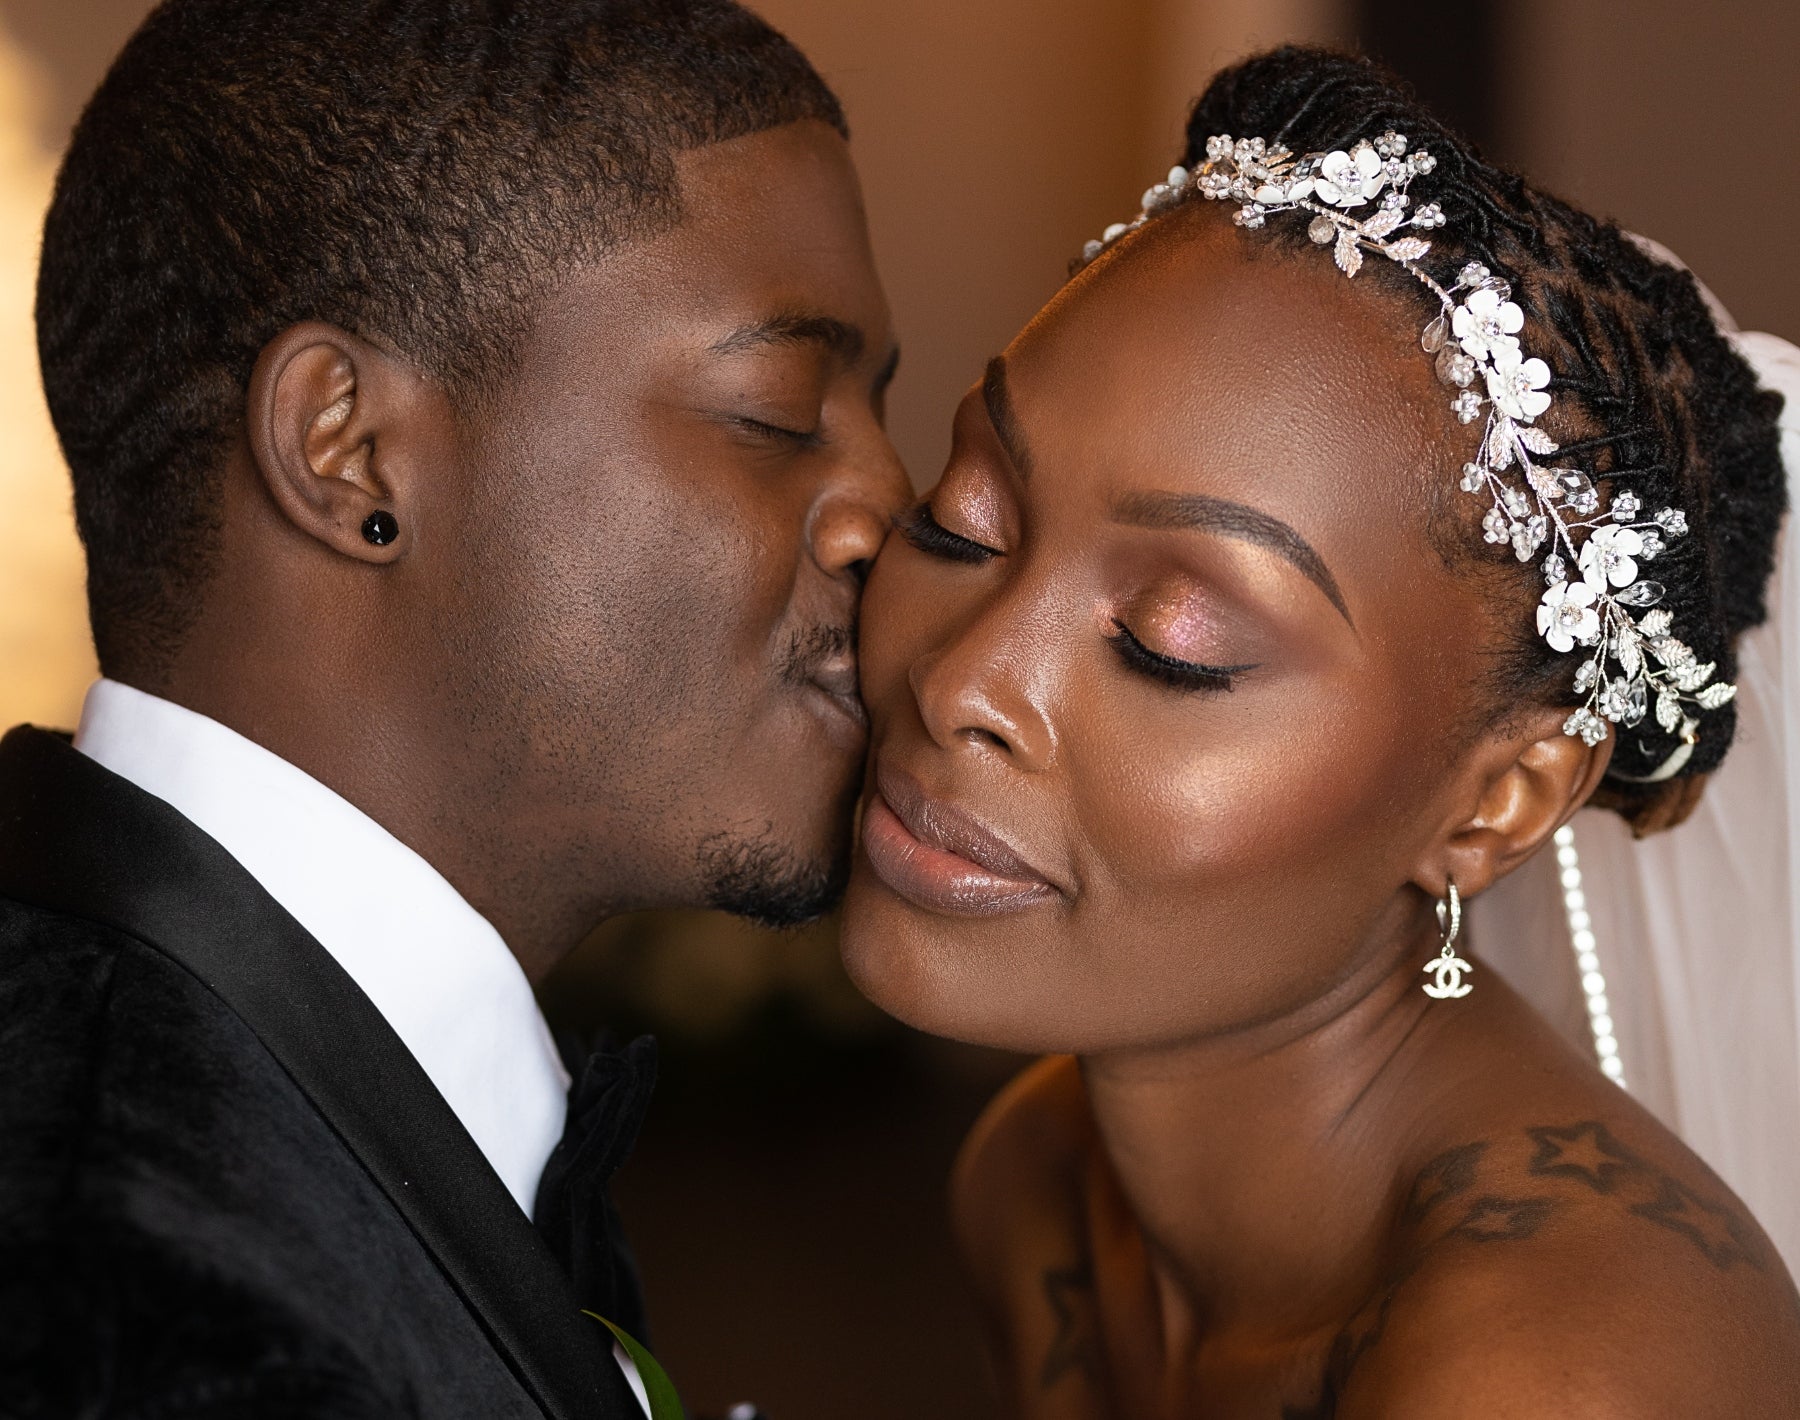 Bridal Bliss: Jessica And Lawrence Walked On Water To Say "I Do"